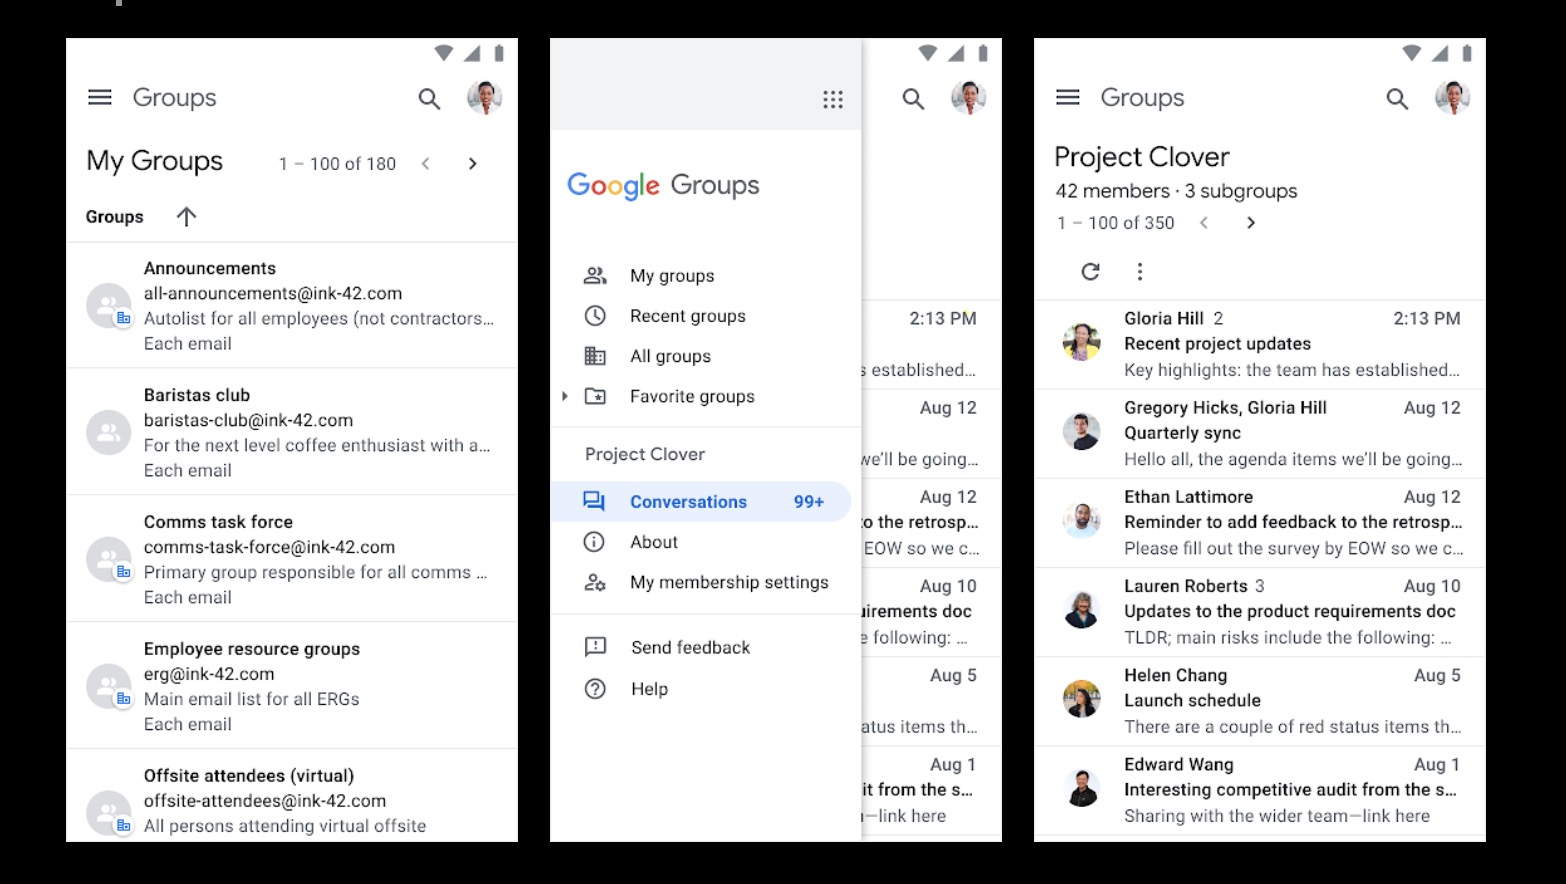 5 tips to take control of Google Groups messages and memberships